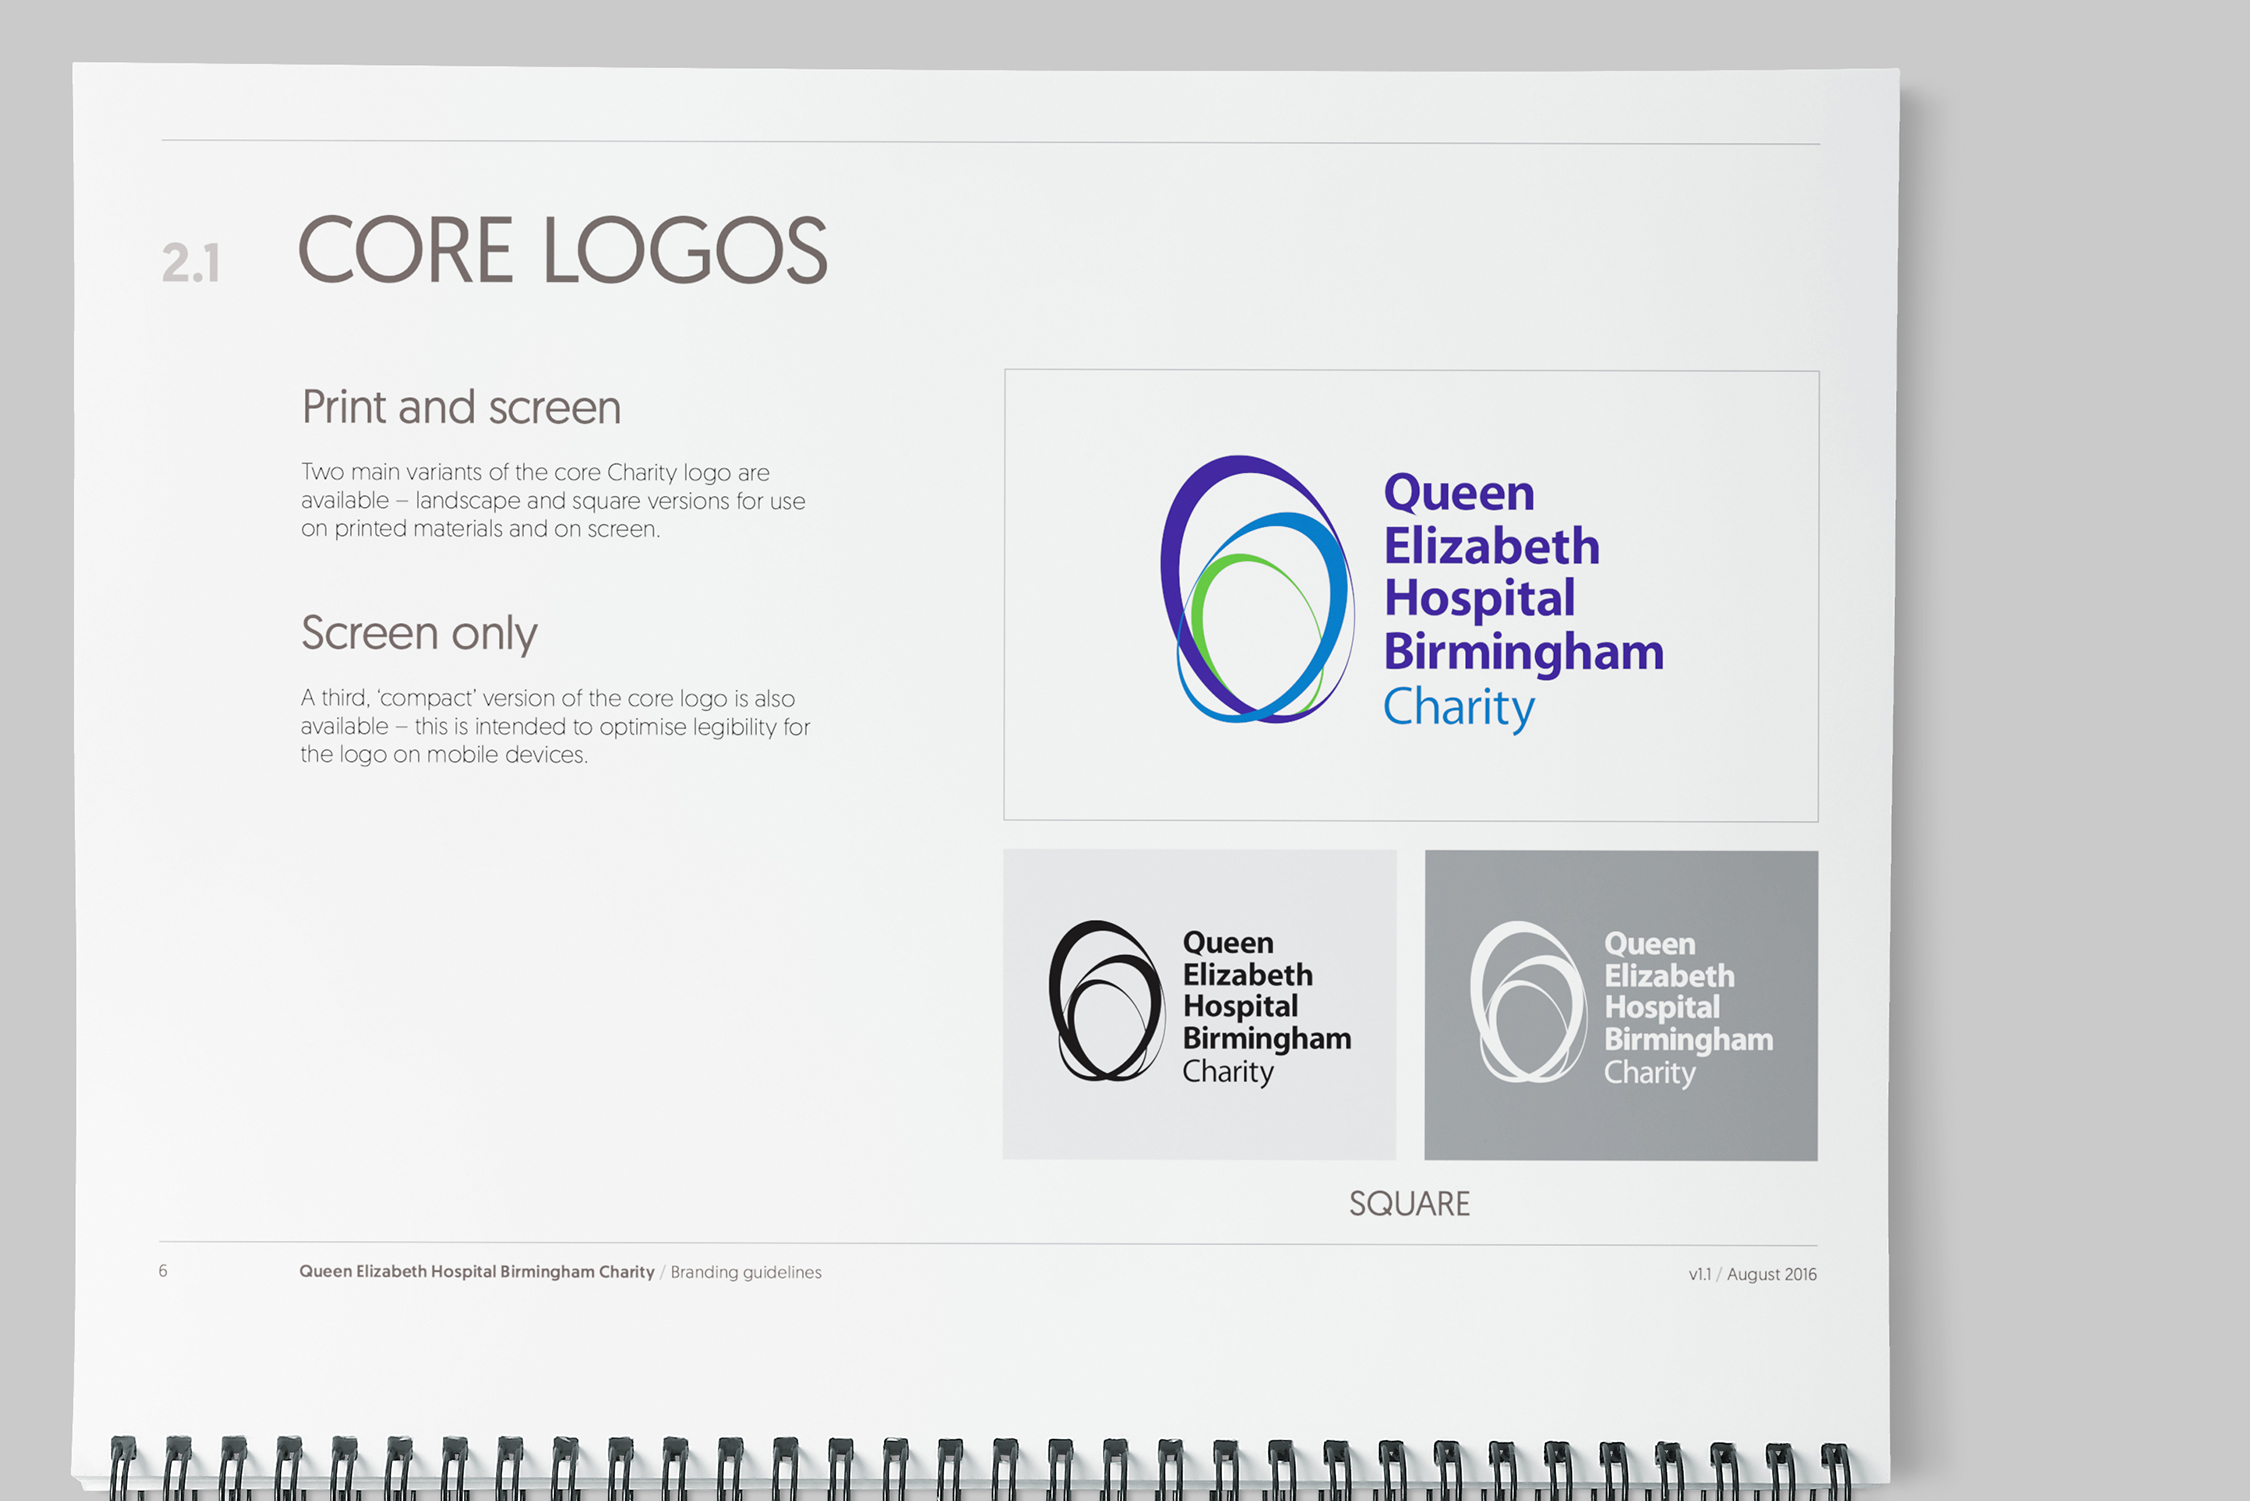 Spread from the 'Core Logos' section of the charity's new brand guidelines, showing the 'Square' variant